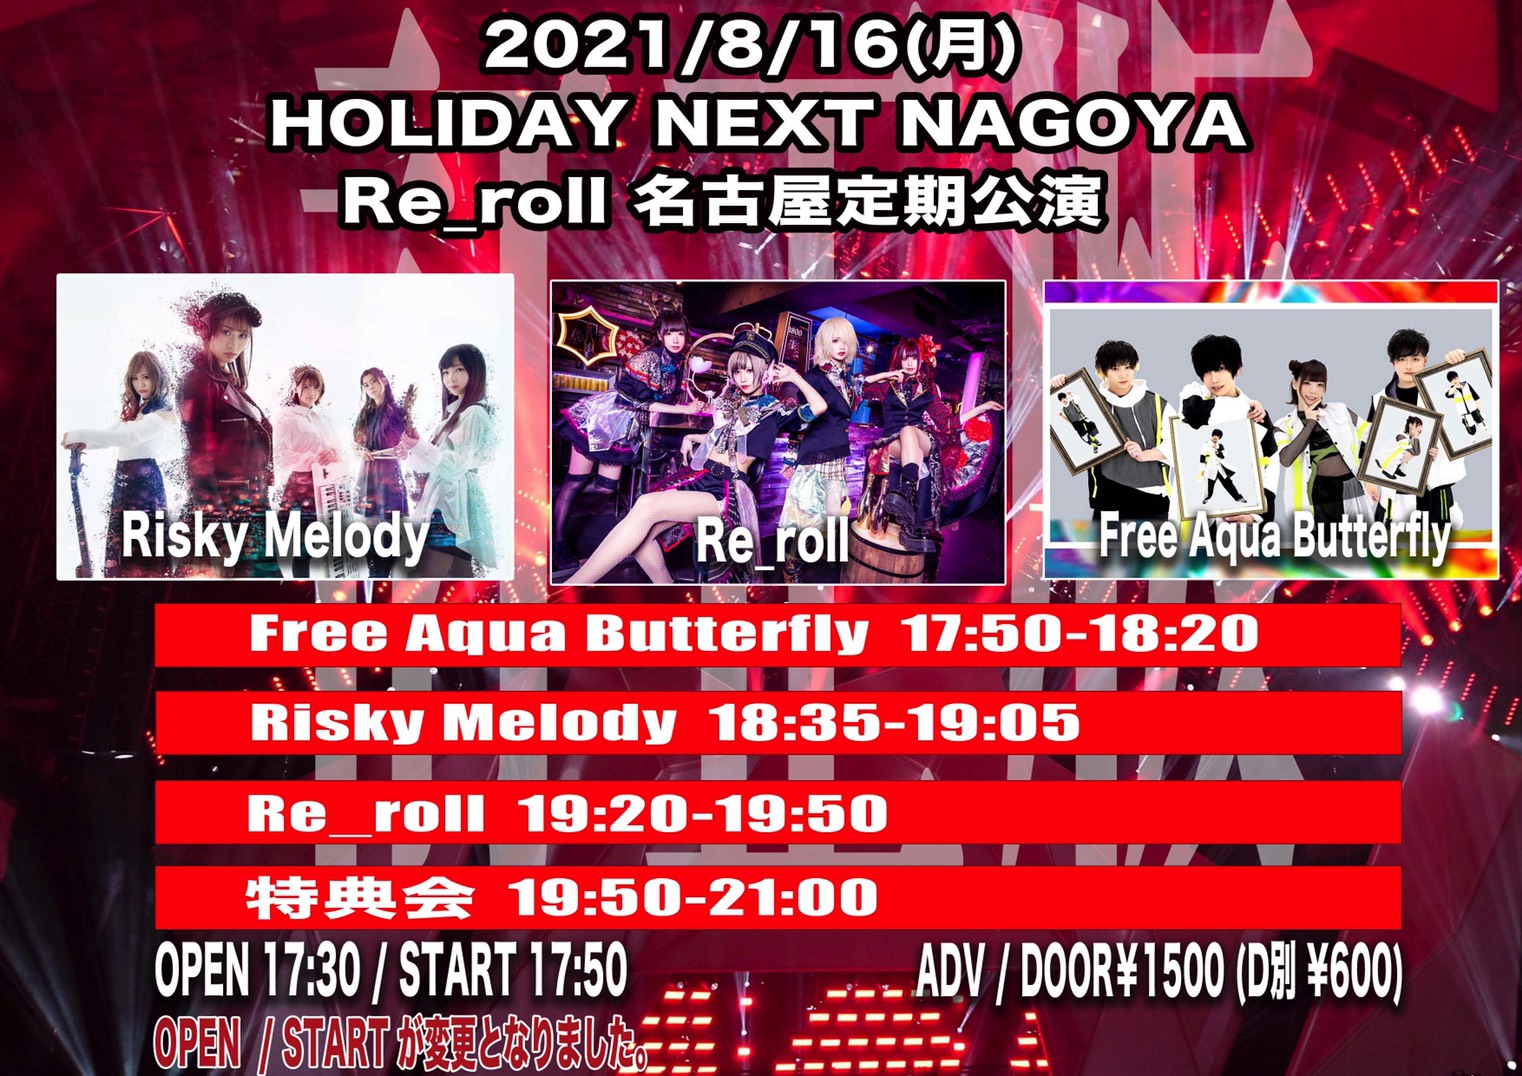 Re_roll 名古屋定期公演